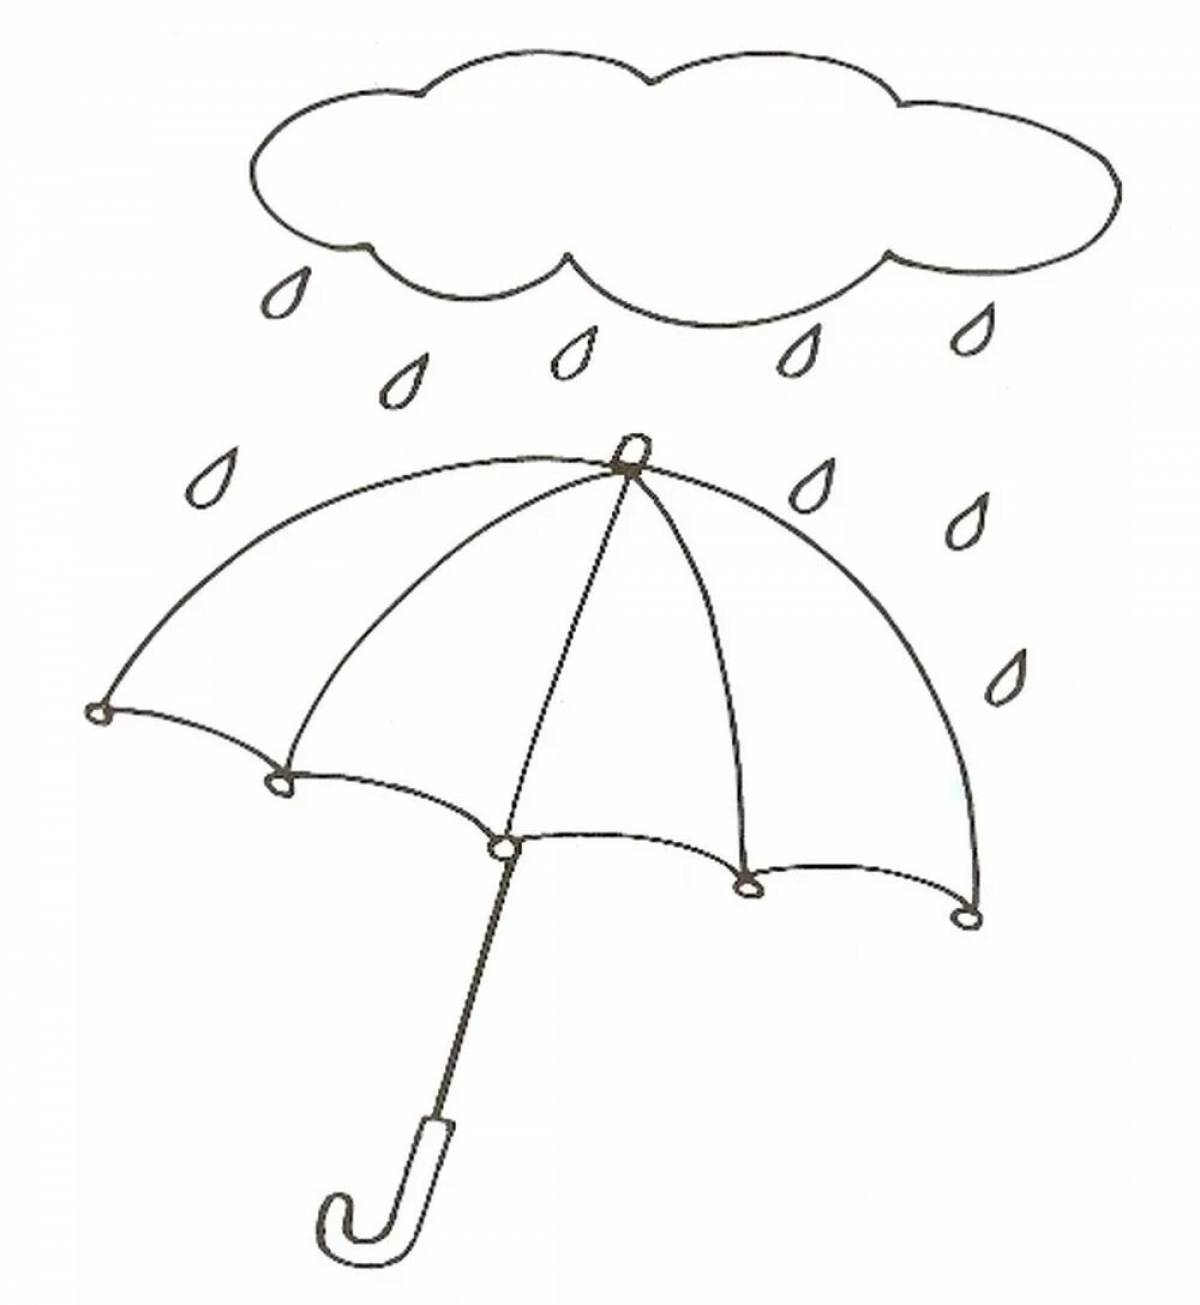 Colored coloring pages with umbrellas for children 3-4 years old